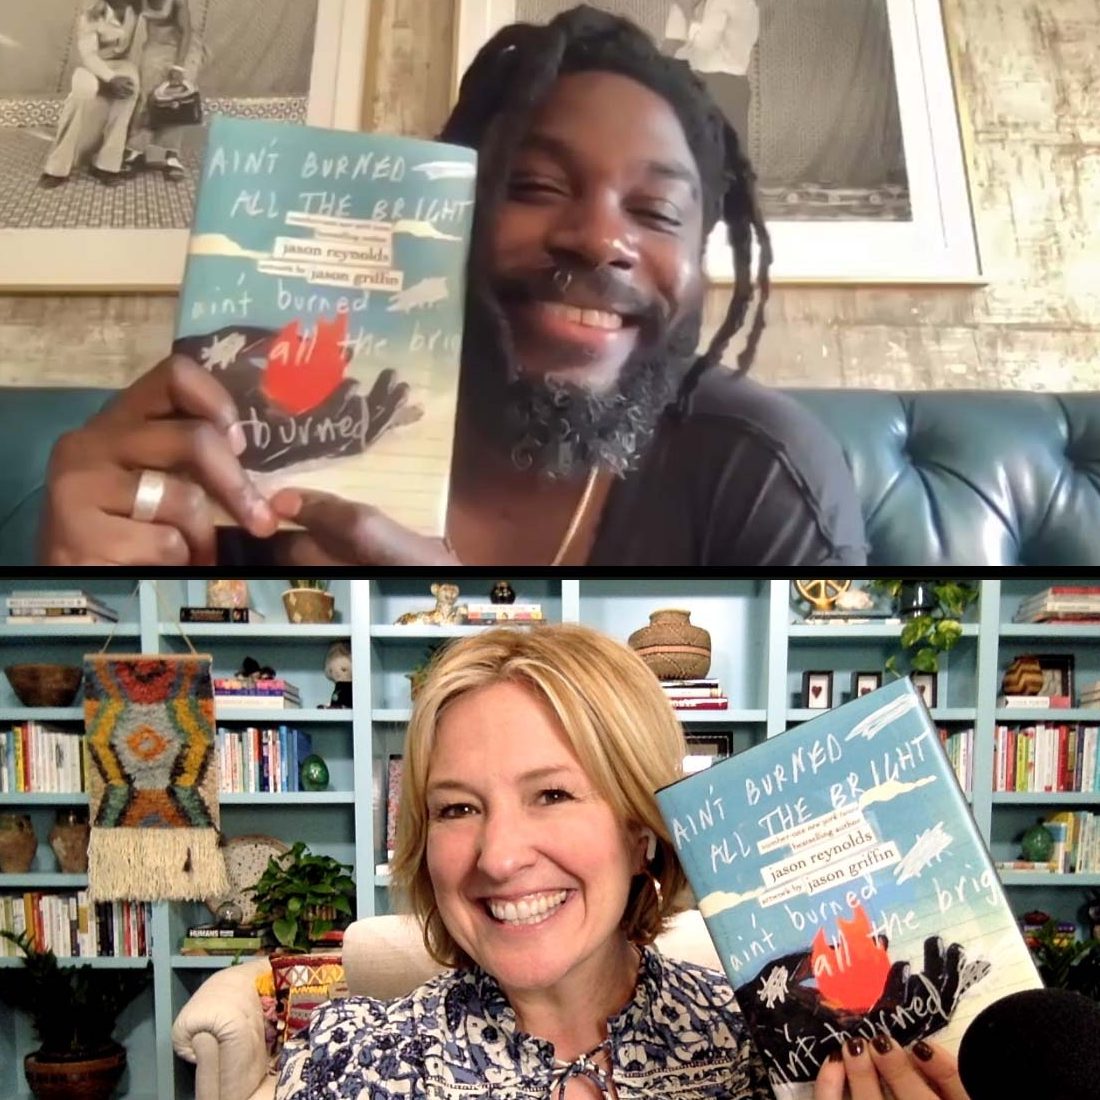 Jason Reynolds, author of Ain’t Burned All the Bright, and Brené Brown recording the Unlocking Us podcast